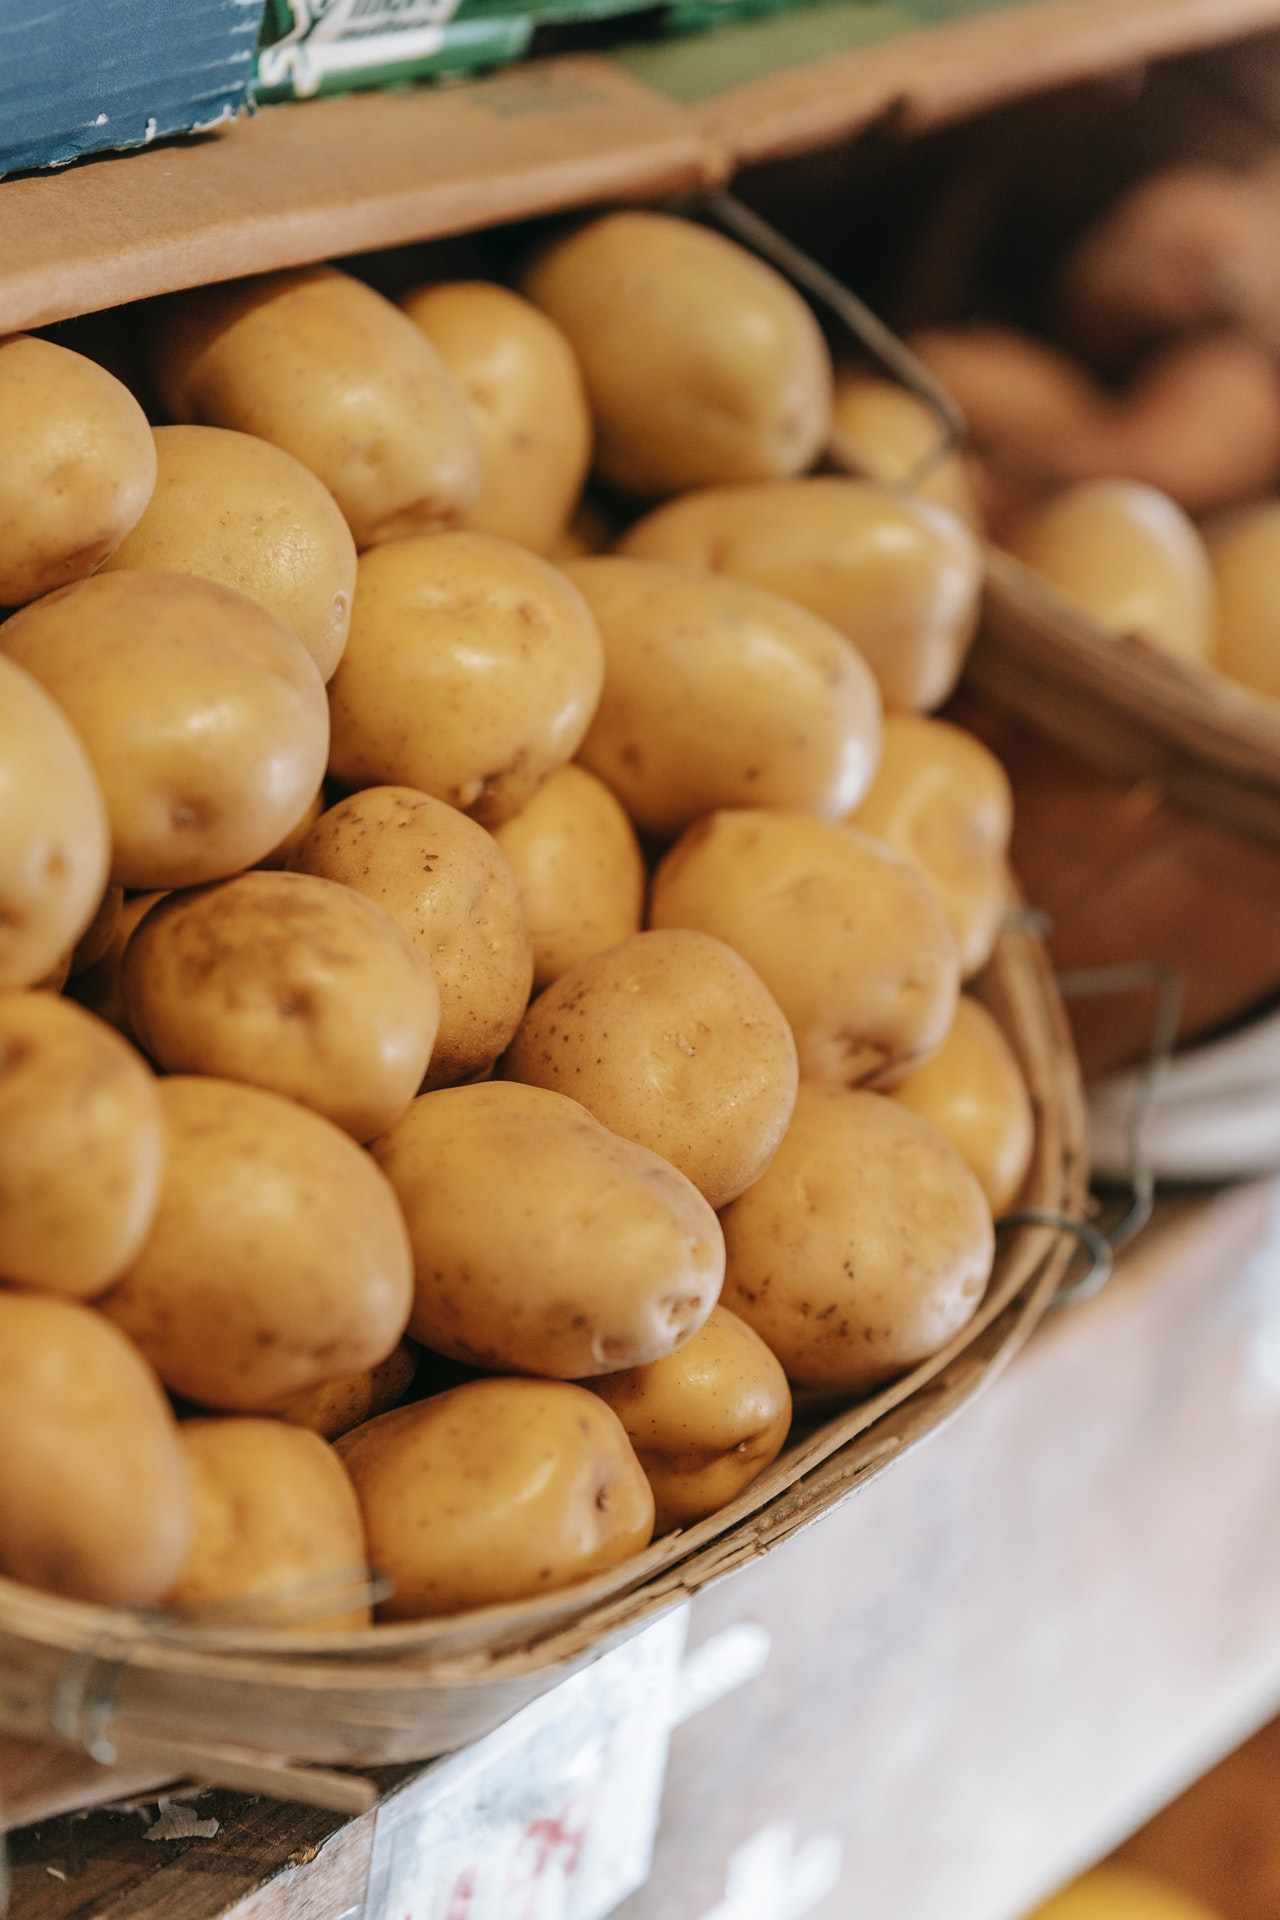 a basket of potatoes on a shelf in a store.